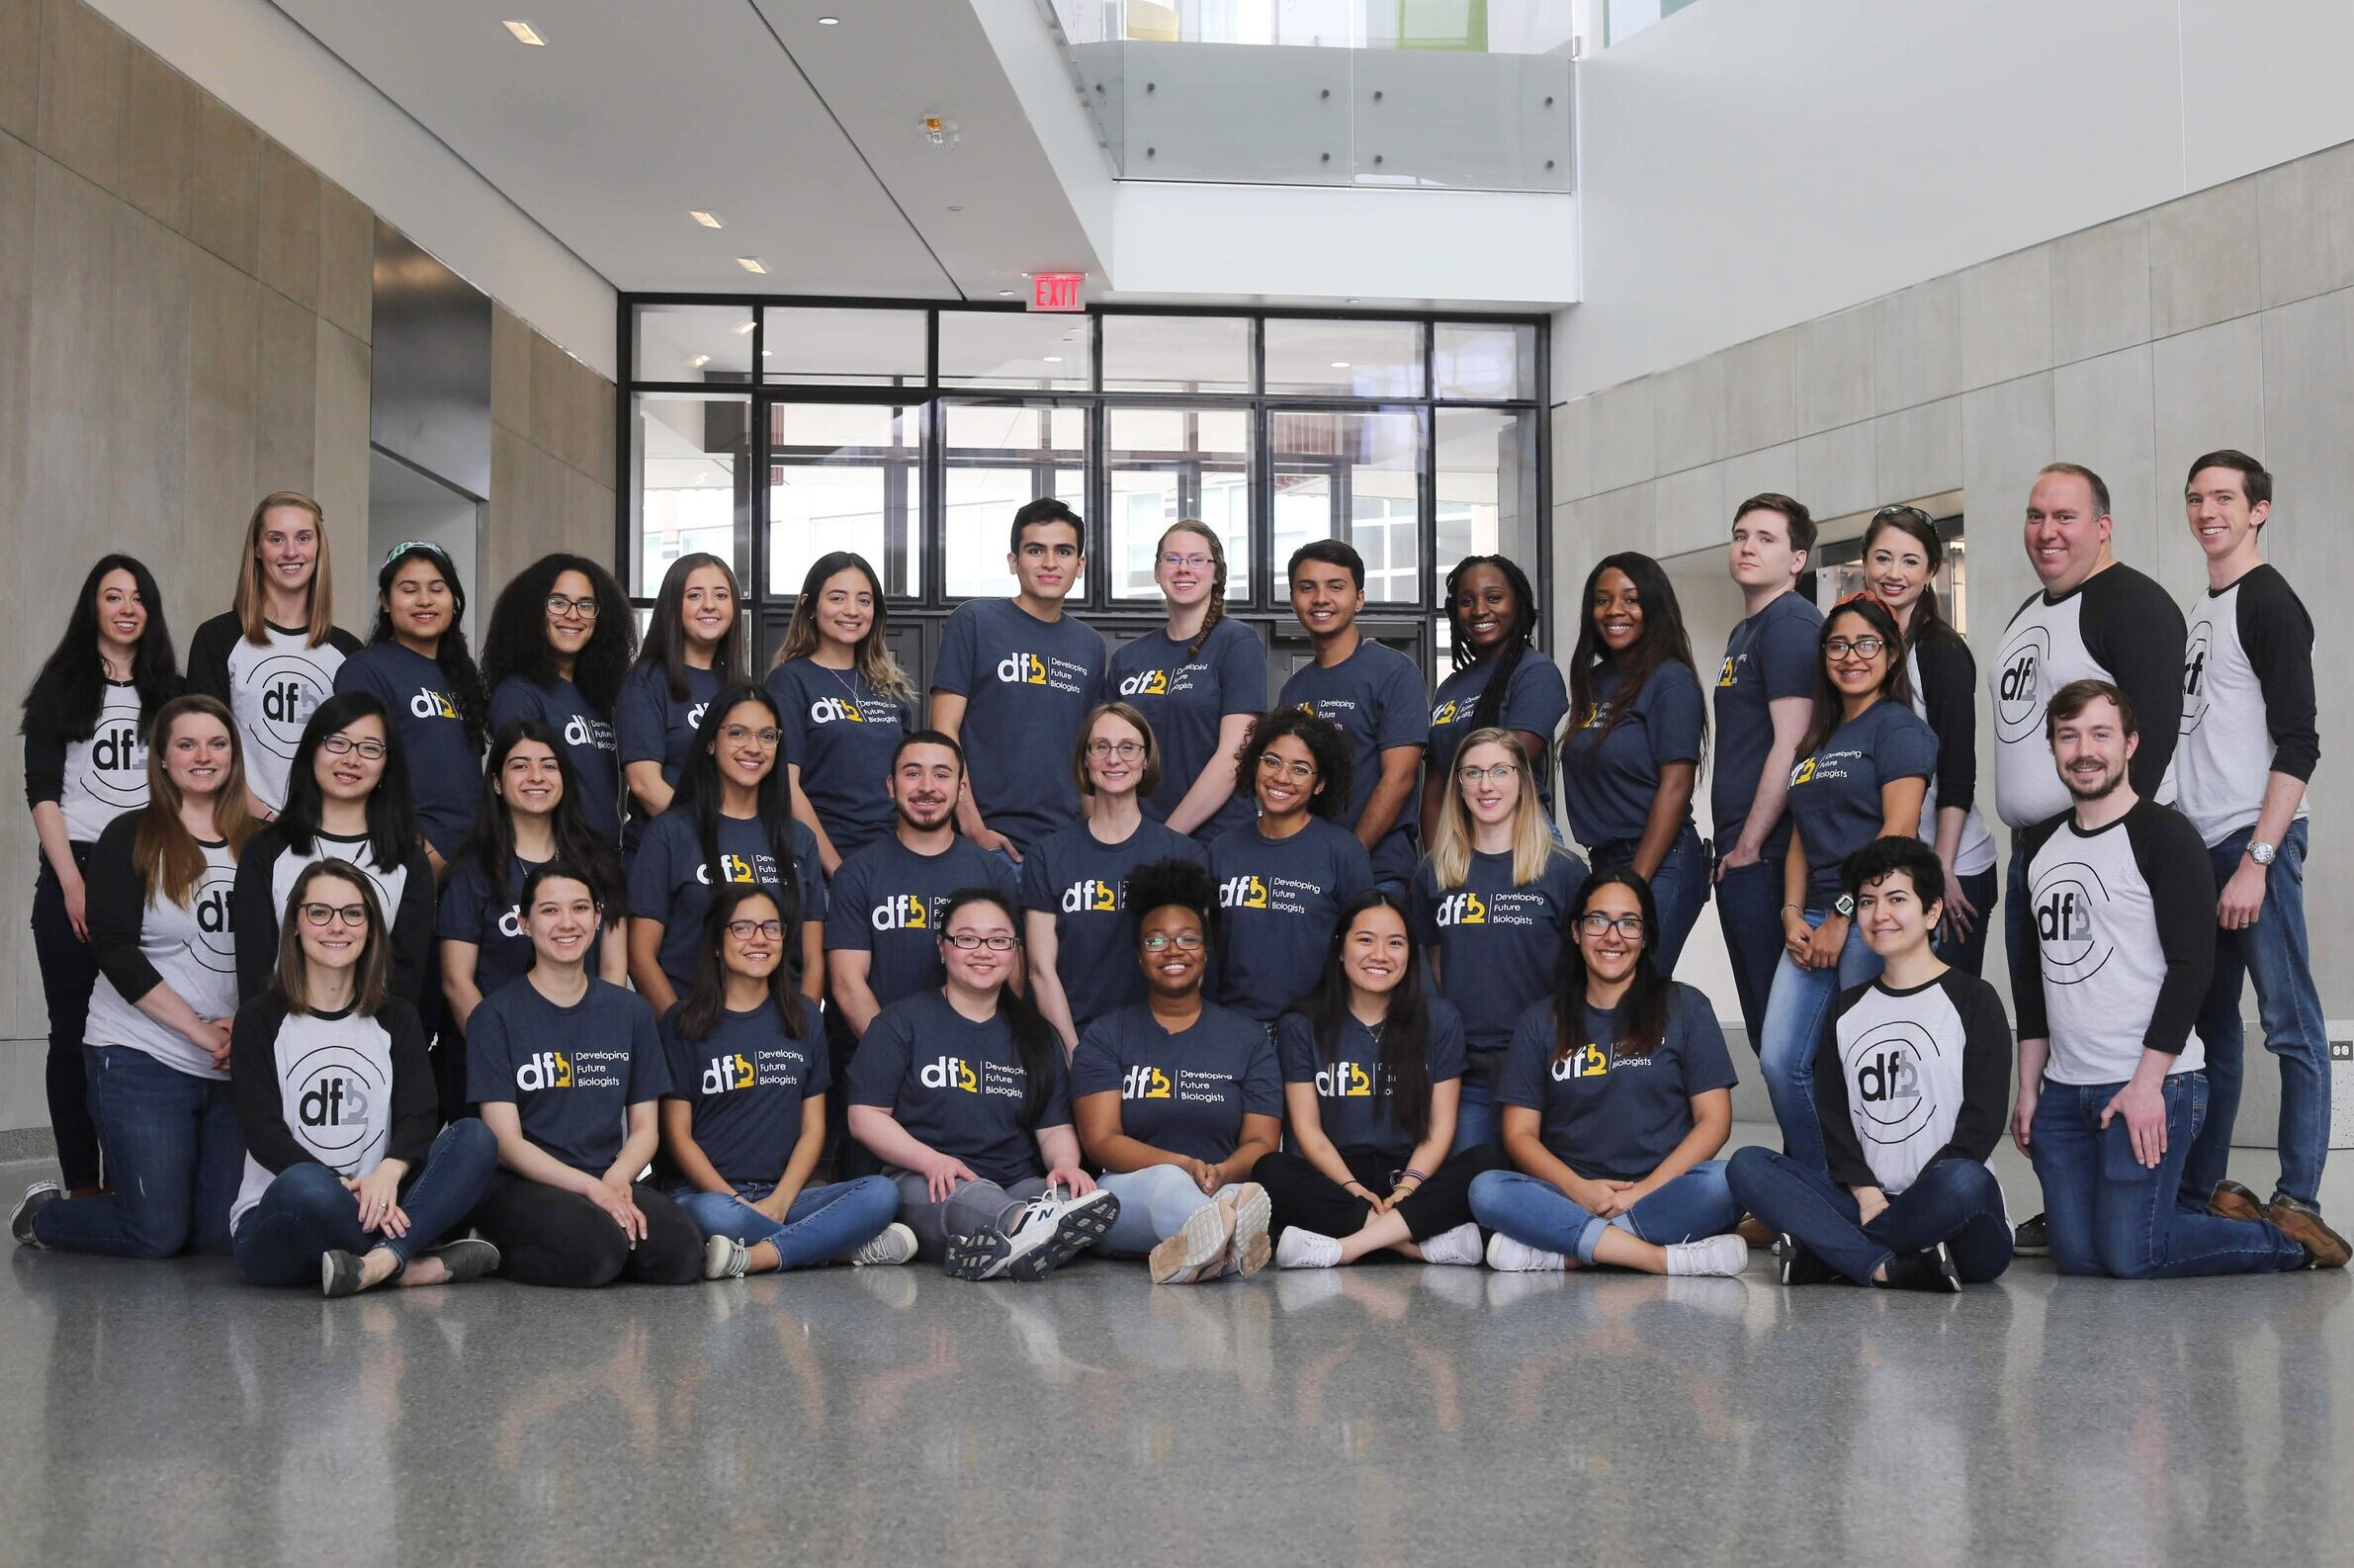  The 2019 instructor and student cohort in their DFB T-shirts 